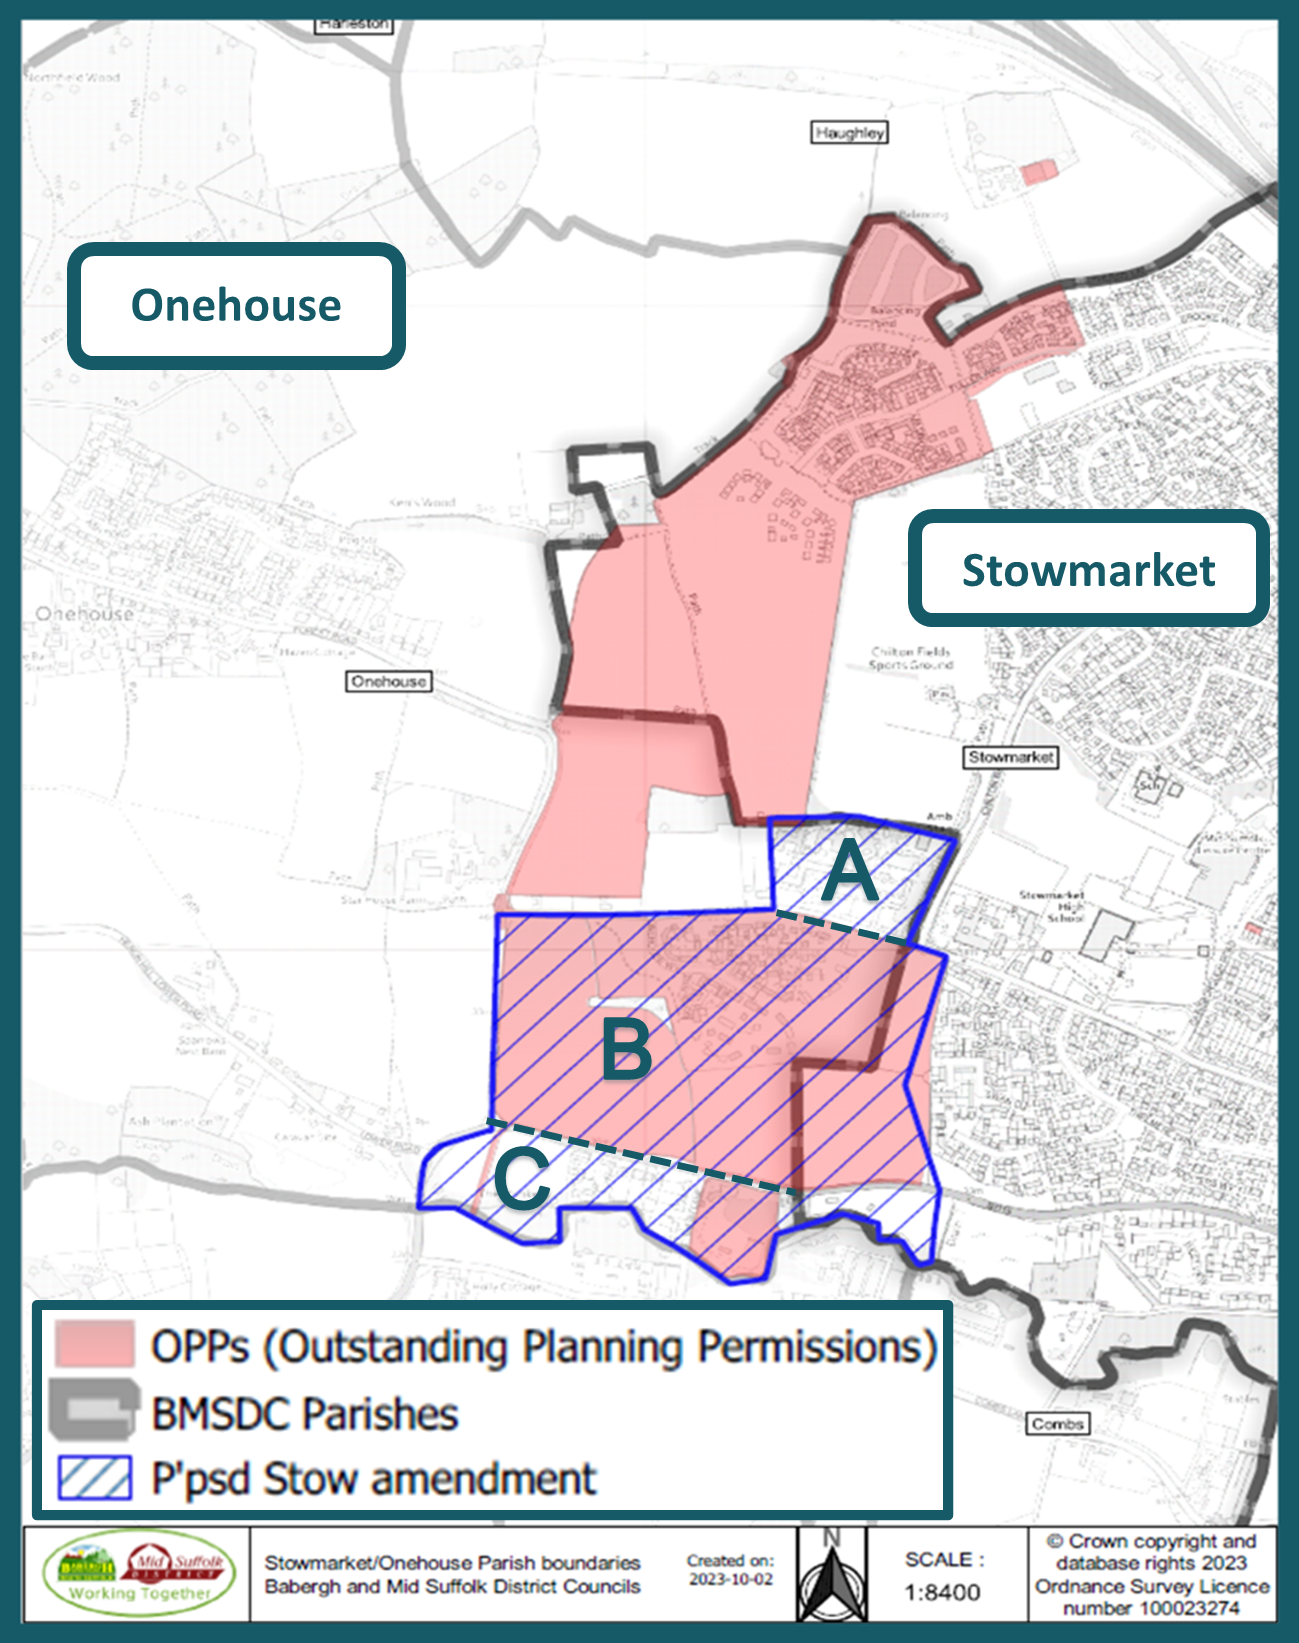 Onehouse and Stowmarket map